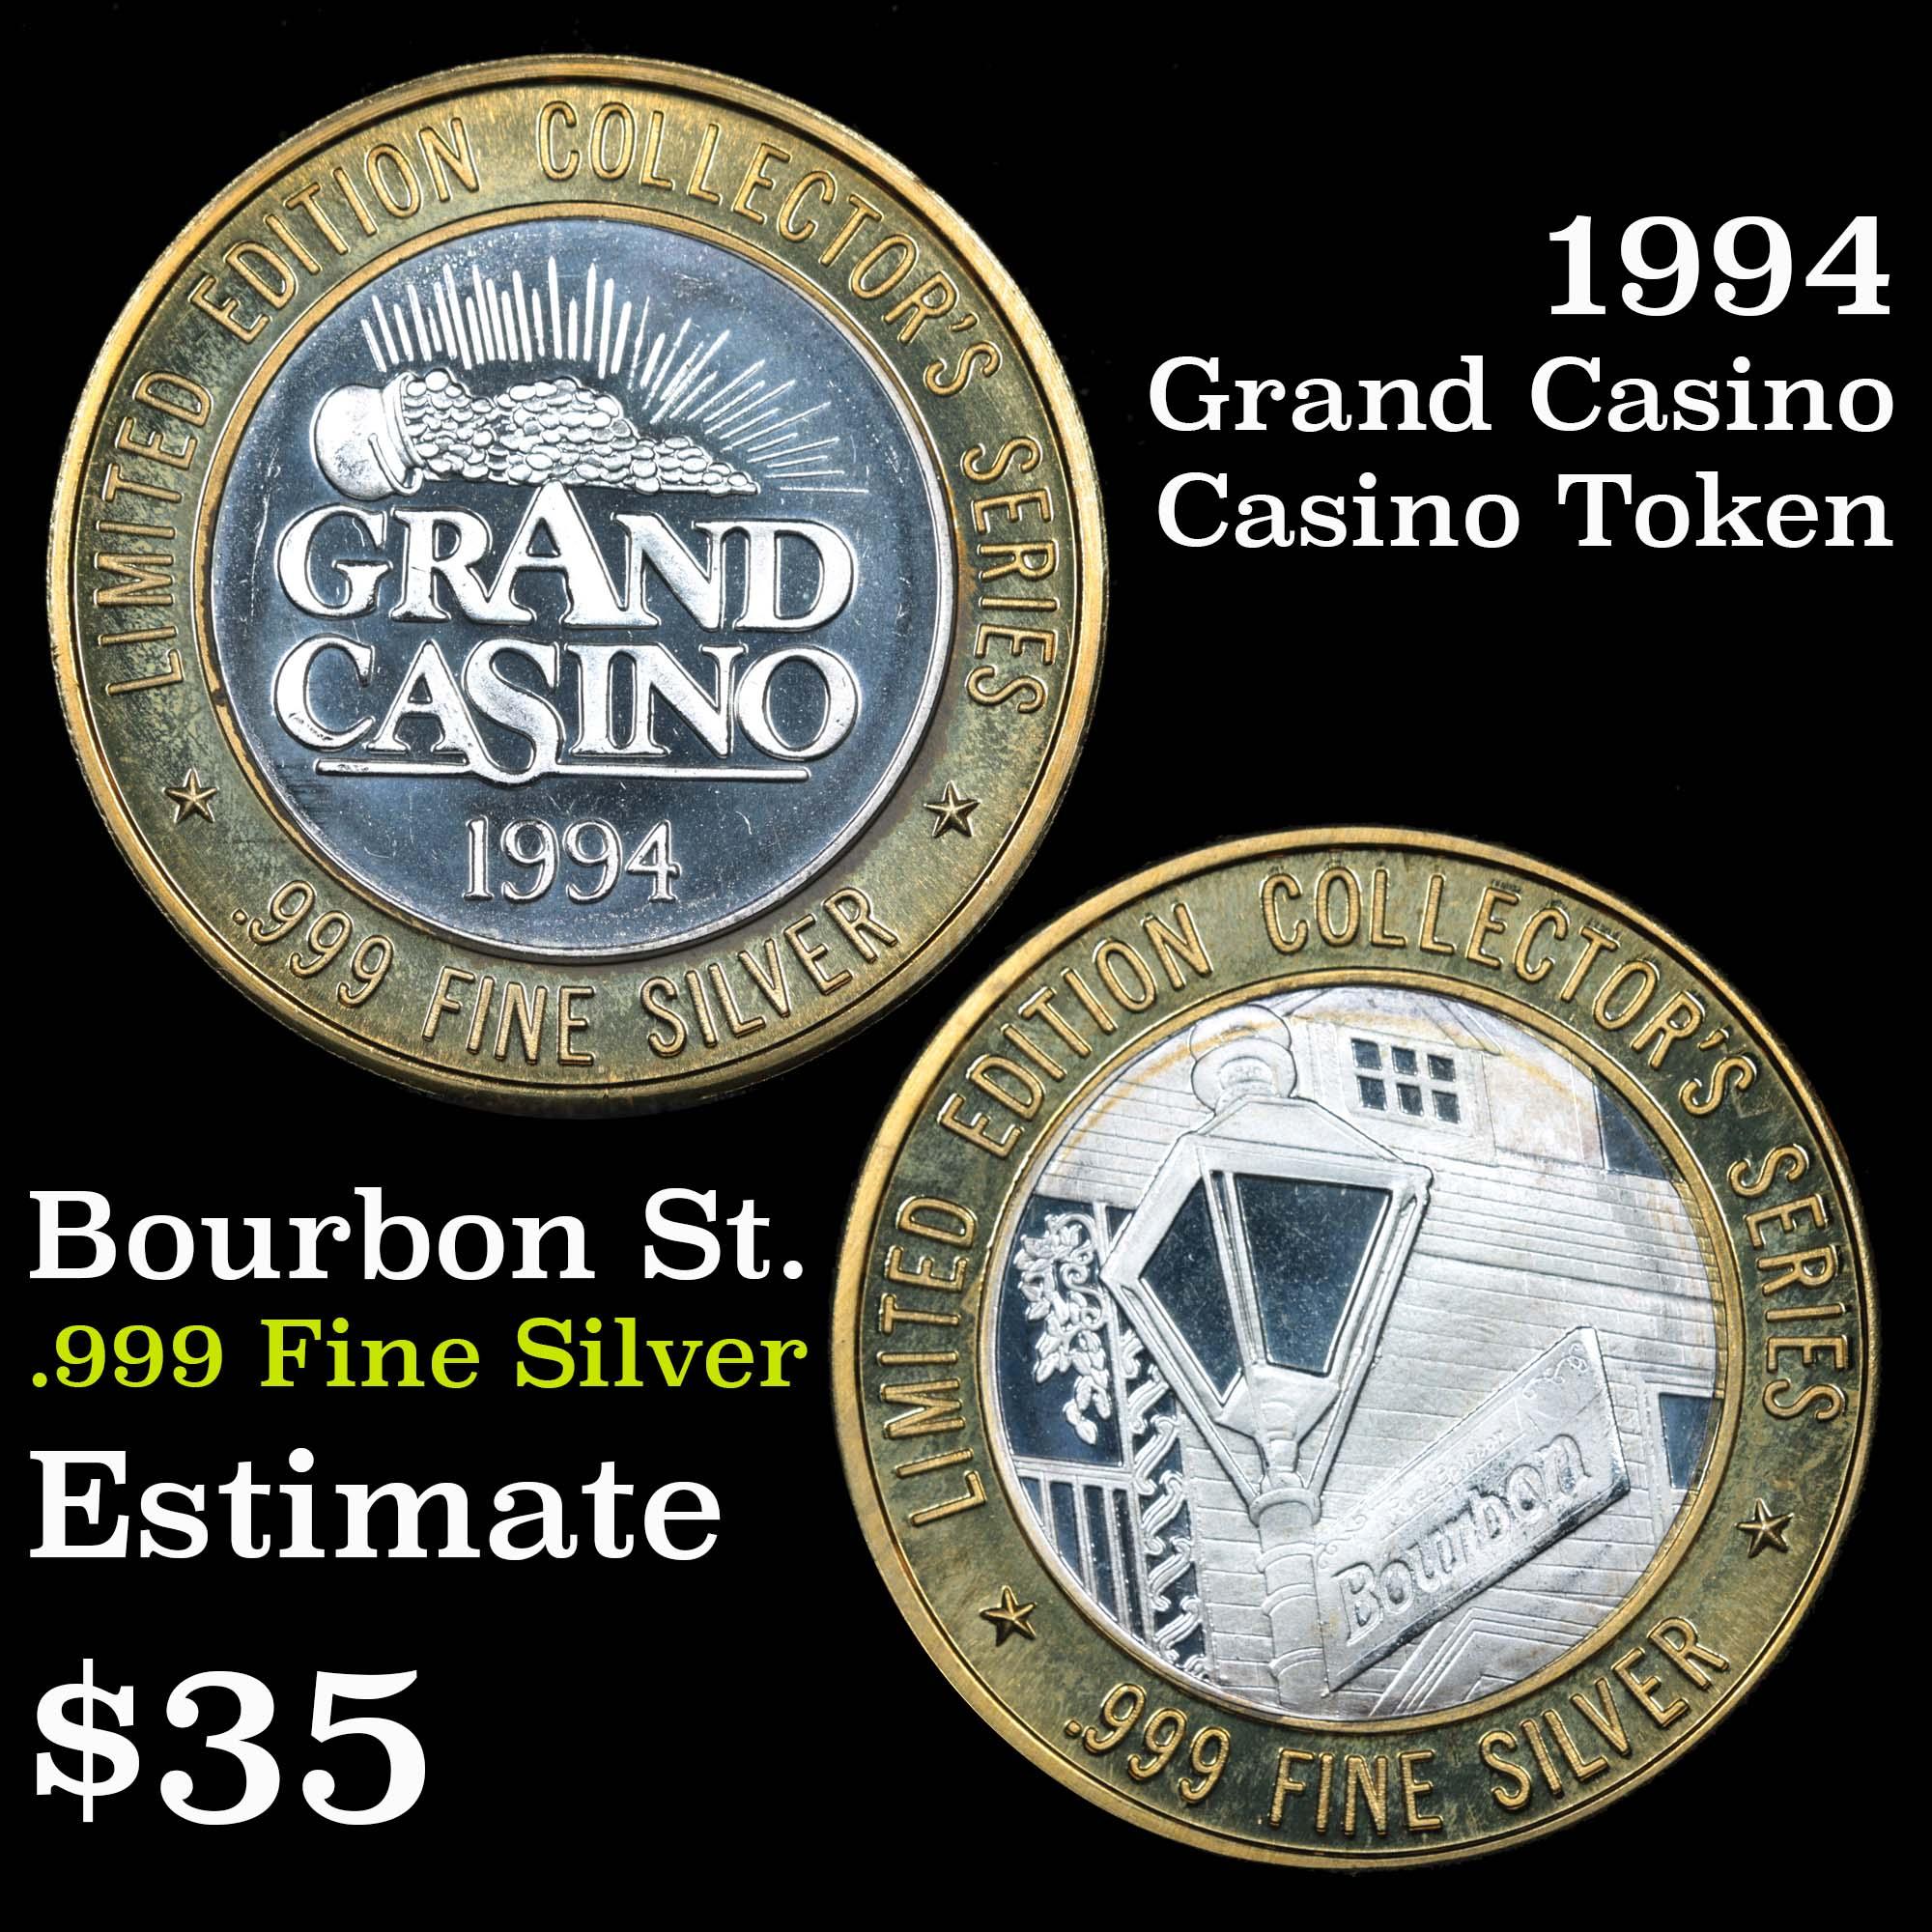 Casino Token with .6 Oz. of Silver in the center 1994 Grand Casino Silver Casino Token